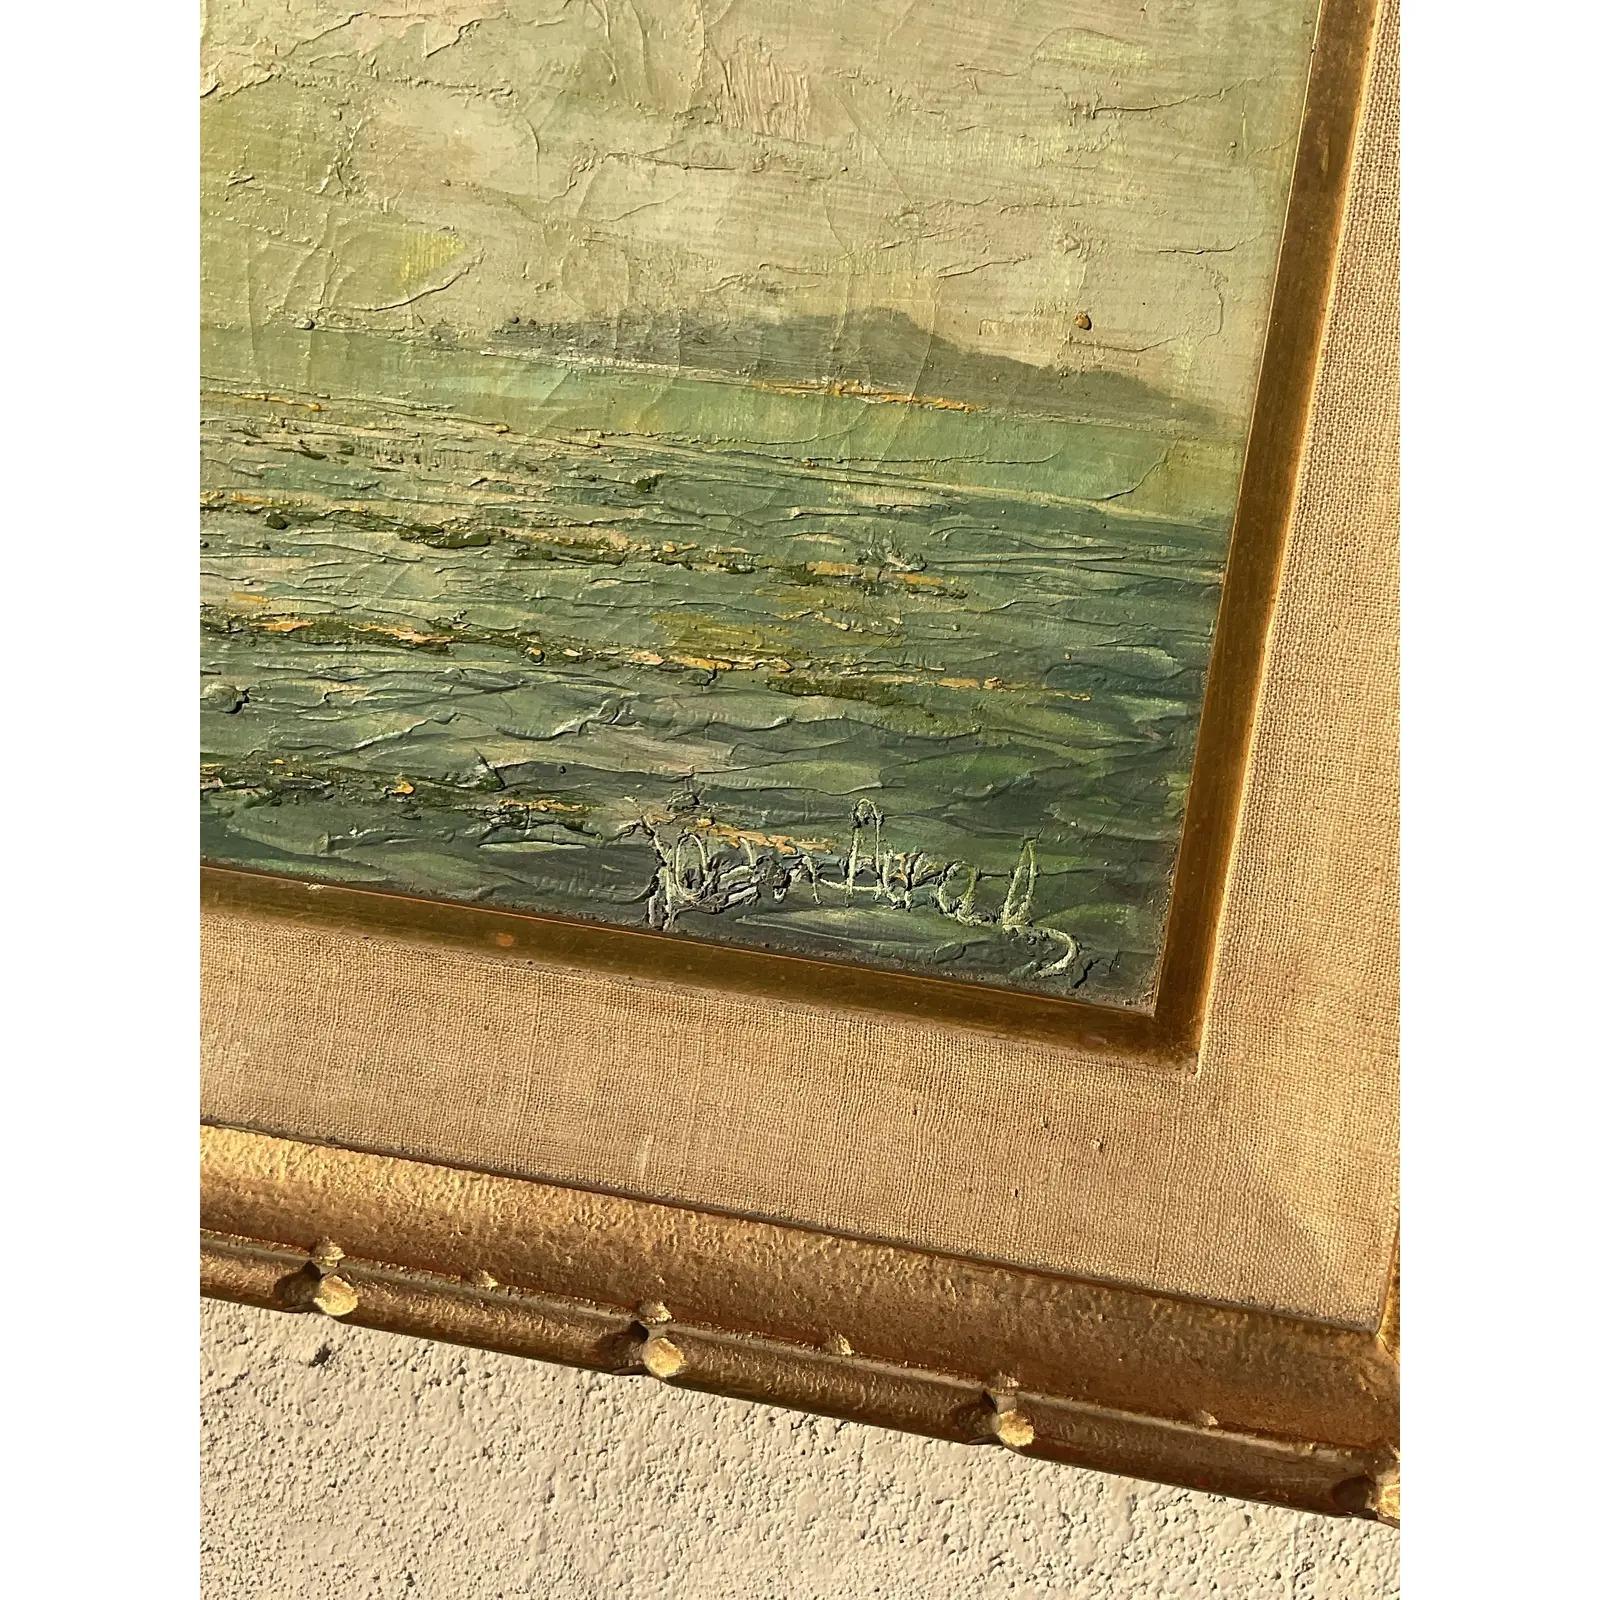 A fabulous vintage coastal original oil painting on canvas. A chic monumental sailboat in deep muted colors. Signed by the artist. Acquired from a Palm Beach estate.

The painting is in great vintage condition. Minor scuffs and blemishes